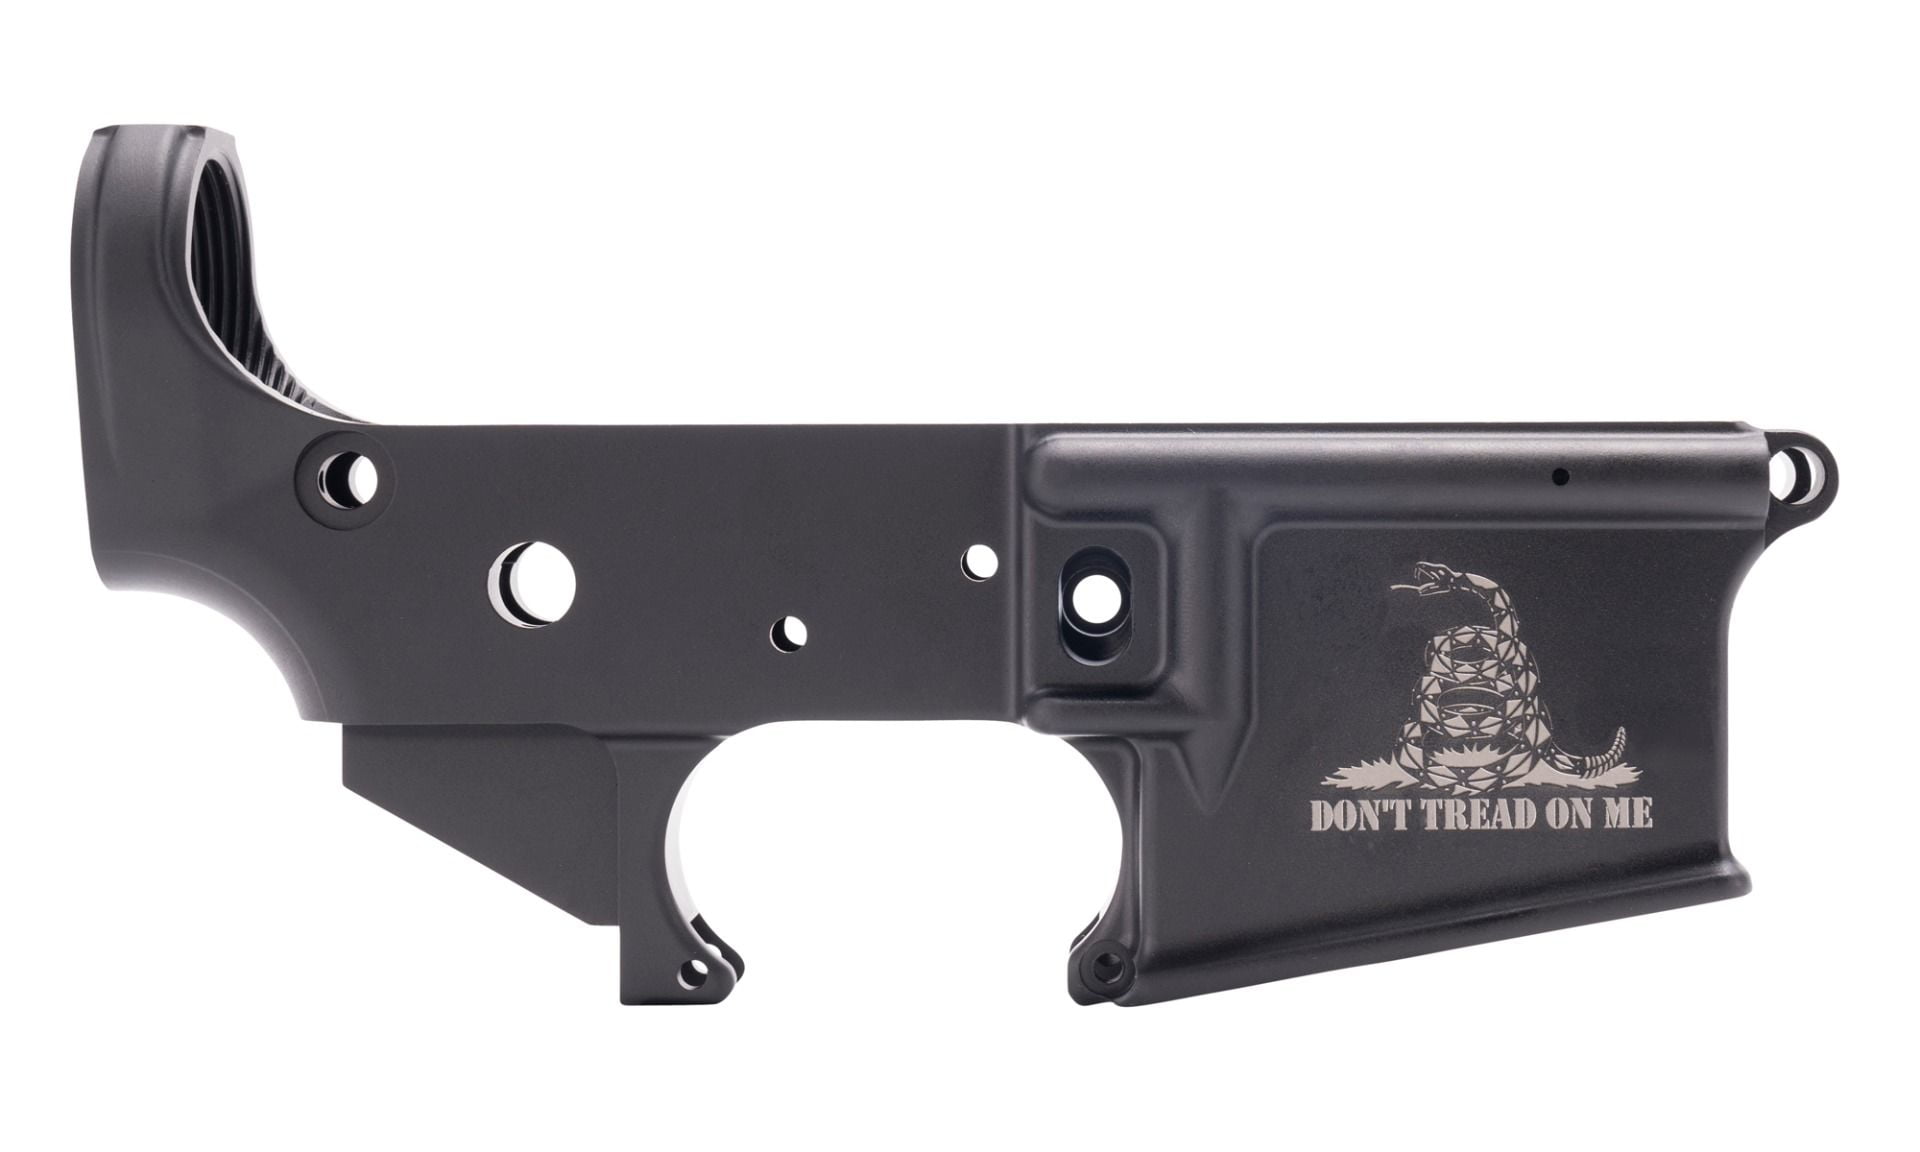 AM-15 STRIPPED LOWER RECEIVER - DON'T TREAD ON ME